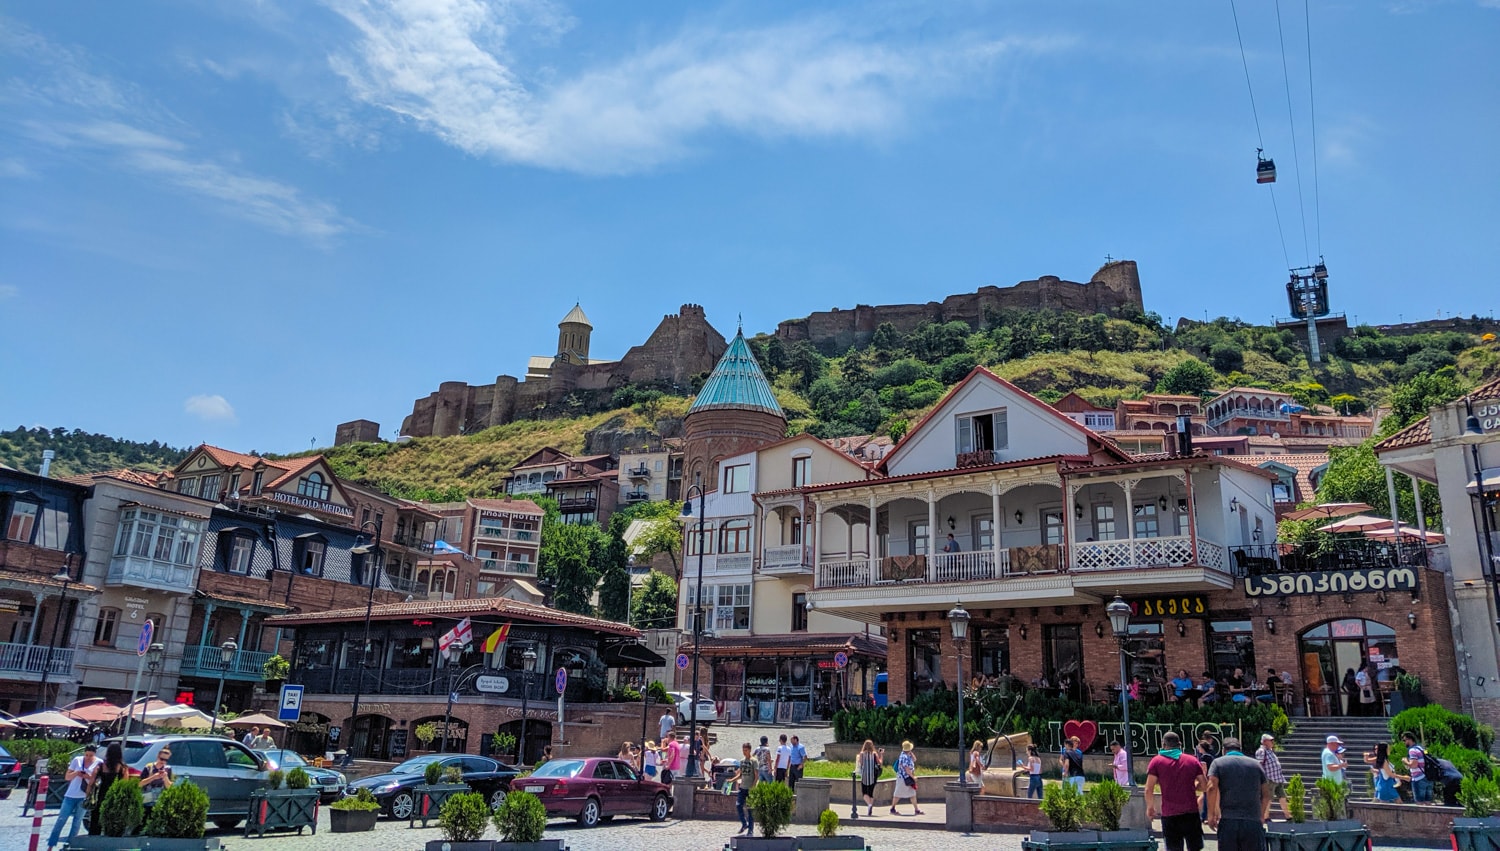 Image of Dzveli Tbilisi - The old city with Narikala Fortress and cable car